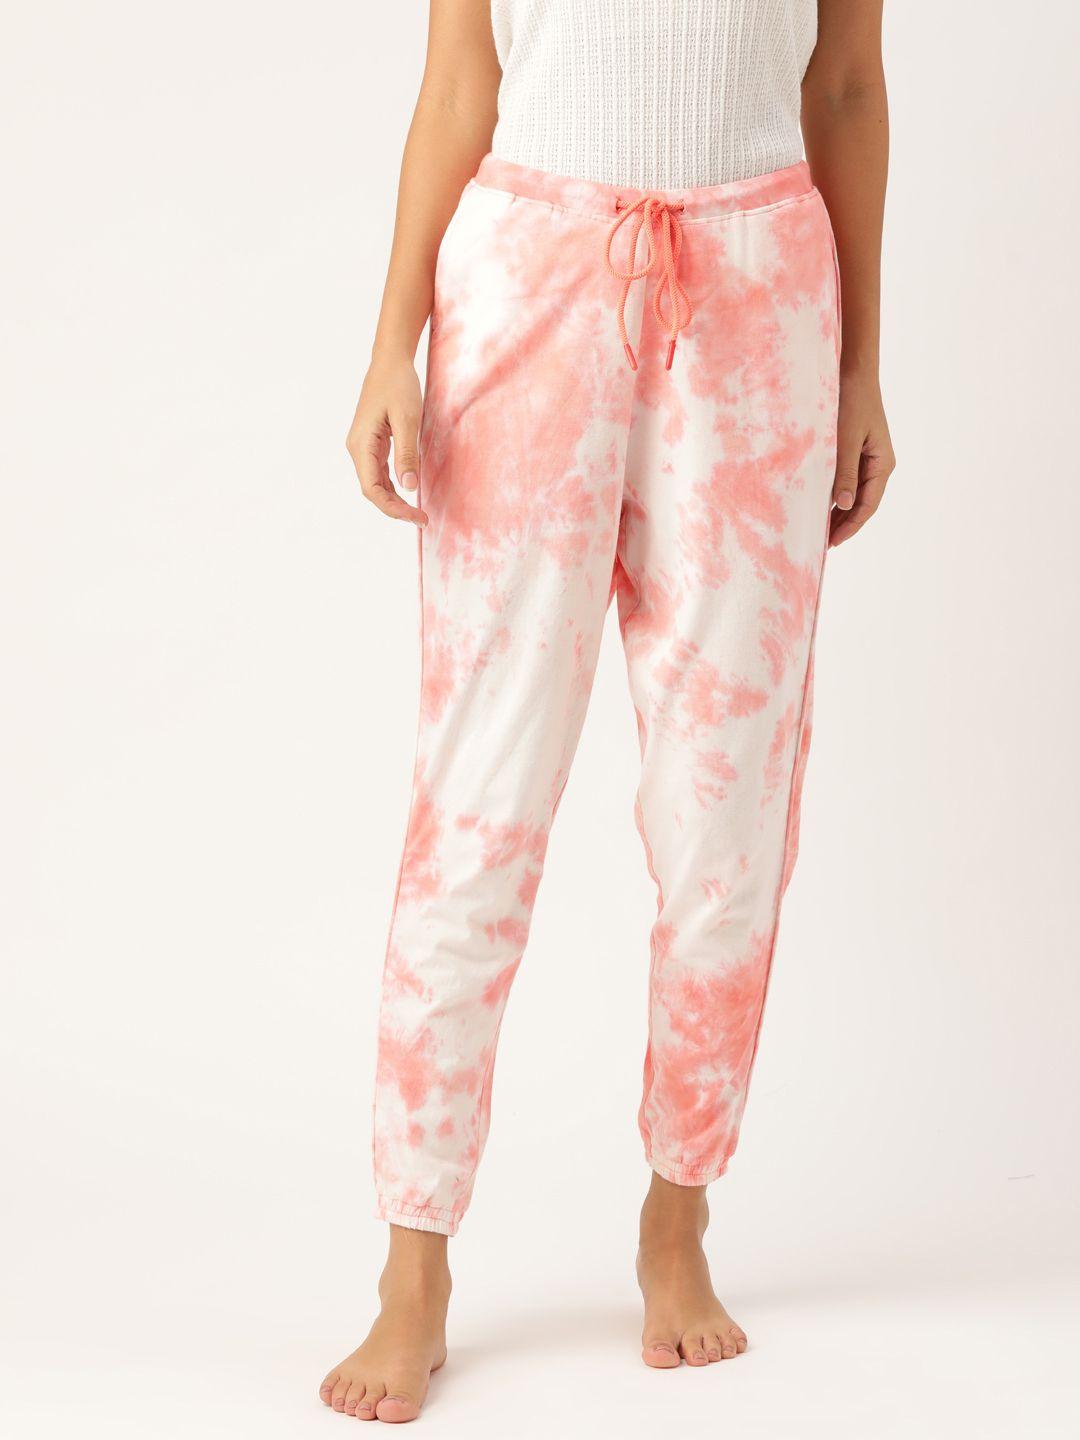 dressberry-women-pink-&-white-dyed-pure-cotton-lounge-pants